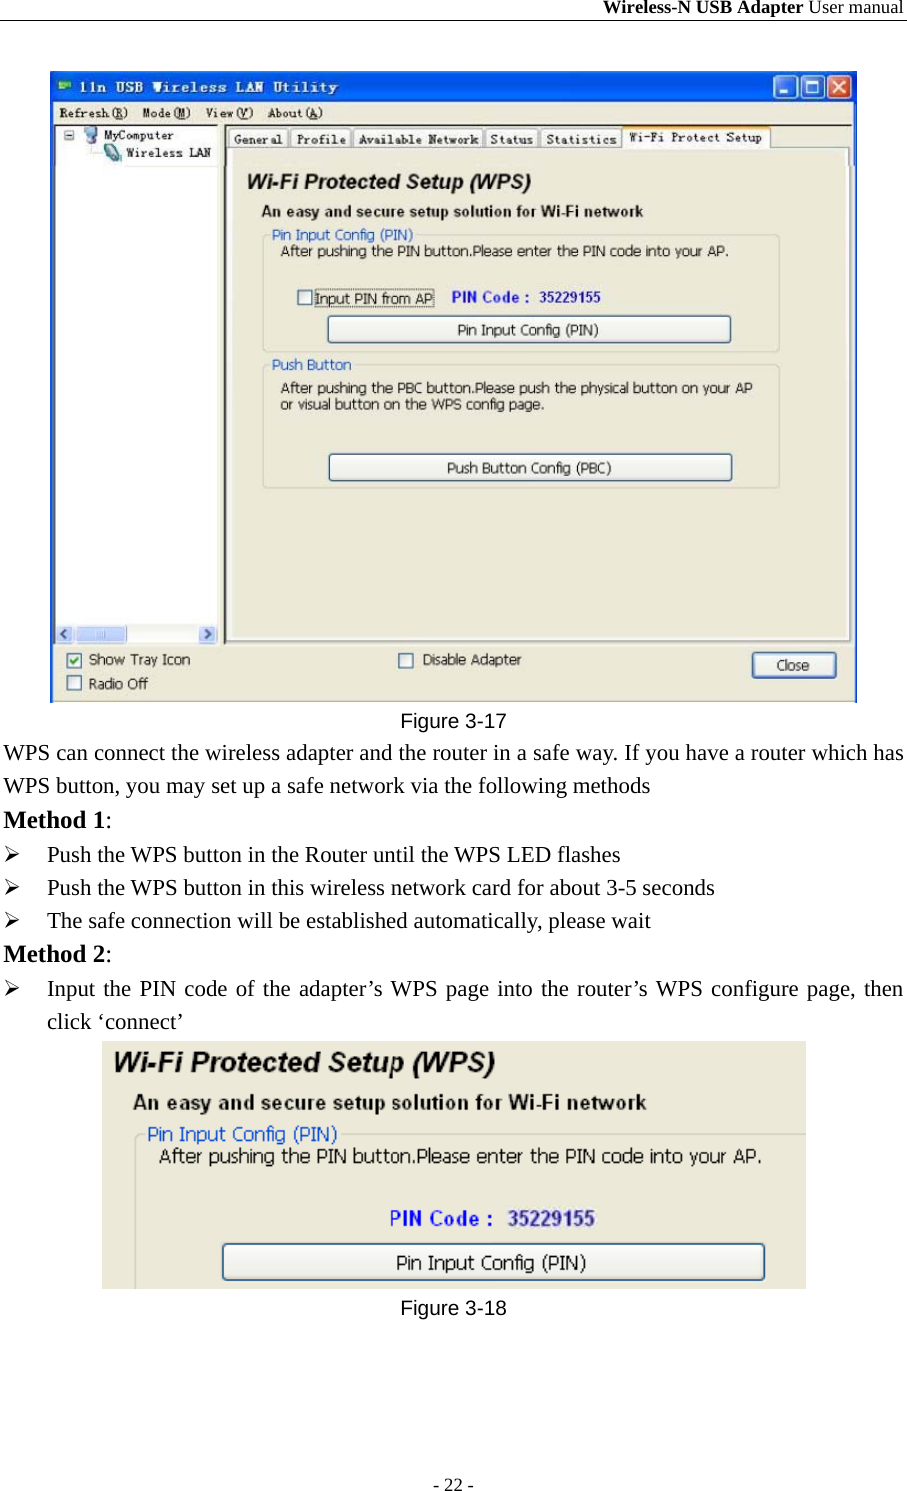 Wireless-N USB Adapter User manual - 22 -  Figure 3-17 WPS can connect the wireless adapter and the router in a safe way. If you have a router which has WPS button, you may set up a safe network via the following methods Method 1:  Push the WPS button in the Router until the WPS LED flashes  Push the WPS button in this wireless network card for about 3-5 seconds  The safe connection will be established automatically, please wait Method 2:  Input the PIN code of the adapter’s WPS page into the router’s WPS configure page, then click ‘connect’  Figure 3-18 